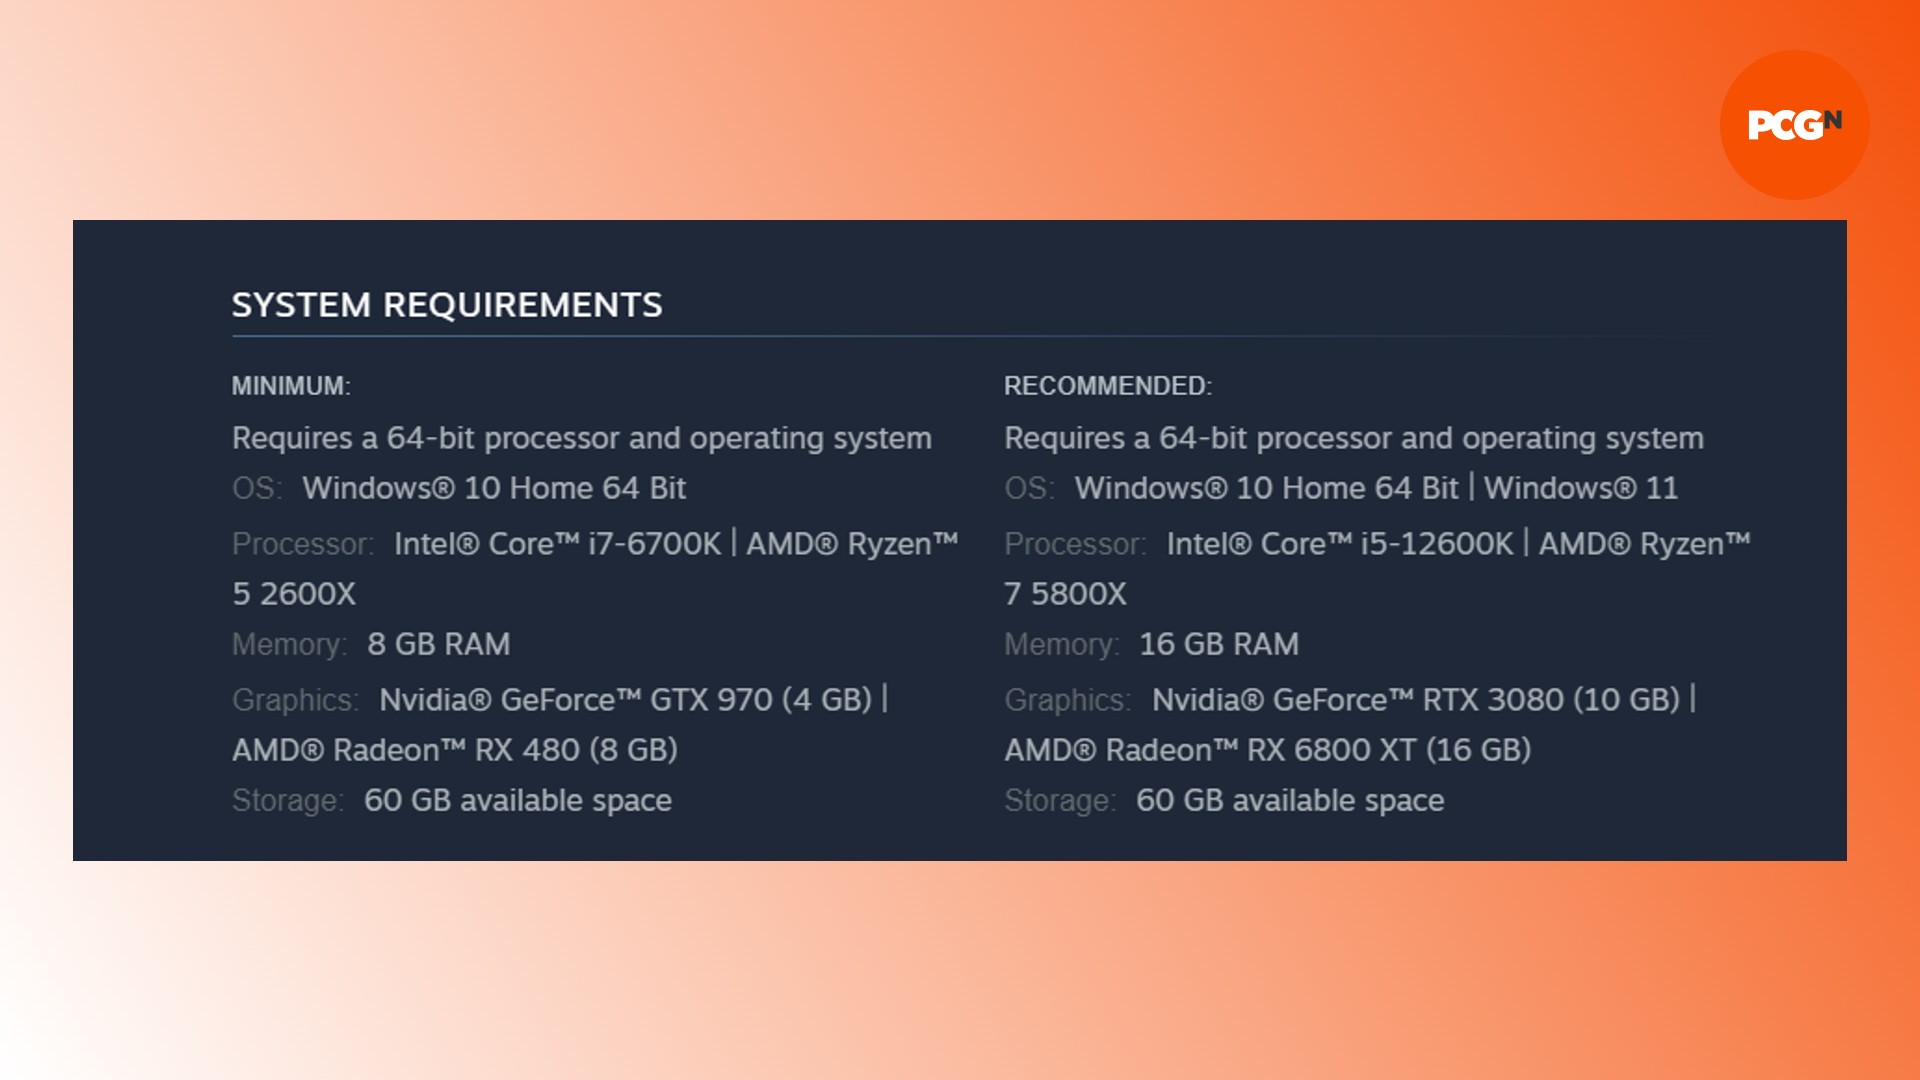 Cities: Skylines 2 – System Requirements